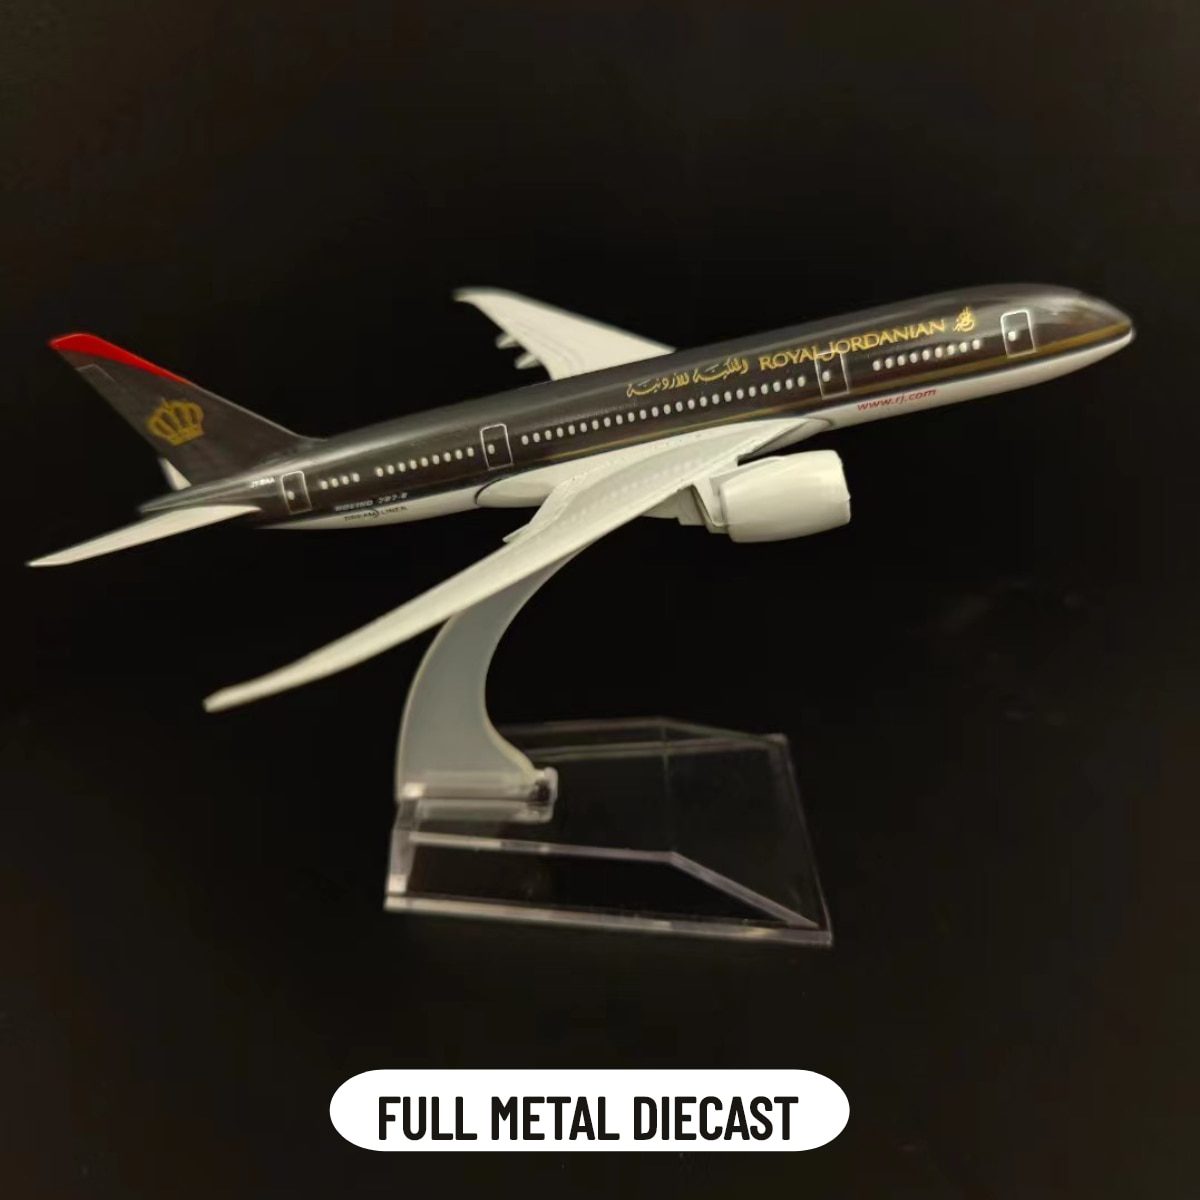 Scale-1-400-Metal-Airplane-Replica-15cm-Jordanian-Africa-Airlines-Aircraft-Model-Aviation-Diecast-Collectible-Miniature-1